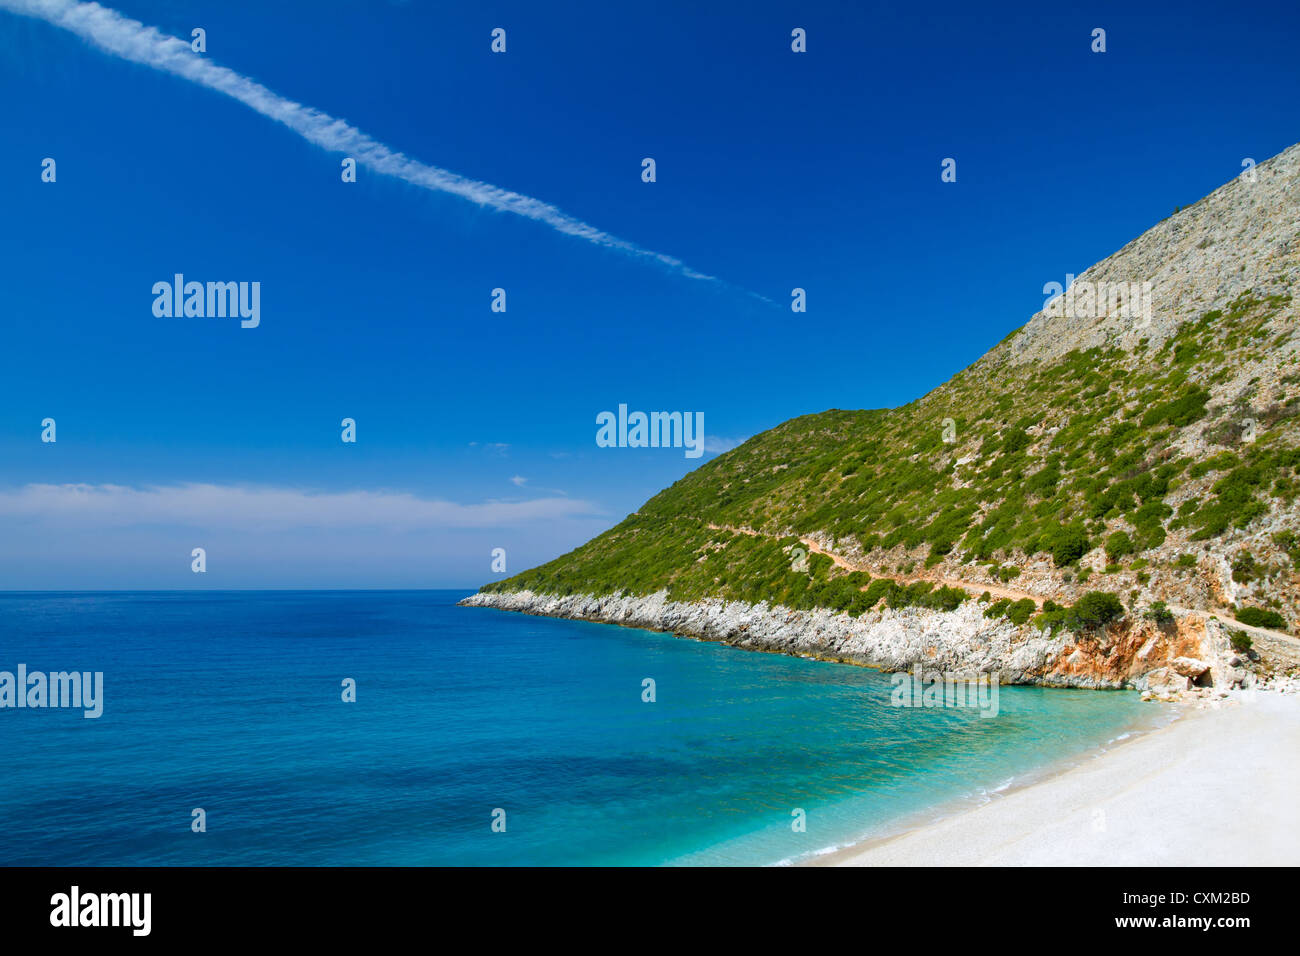 Beautiful sunny beach with white sand and blue water Stock Photo